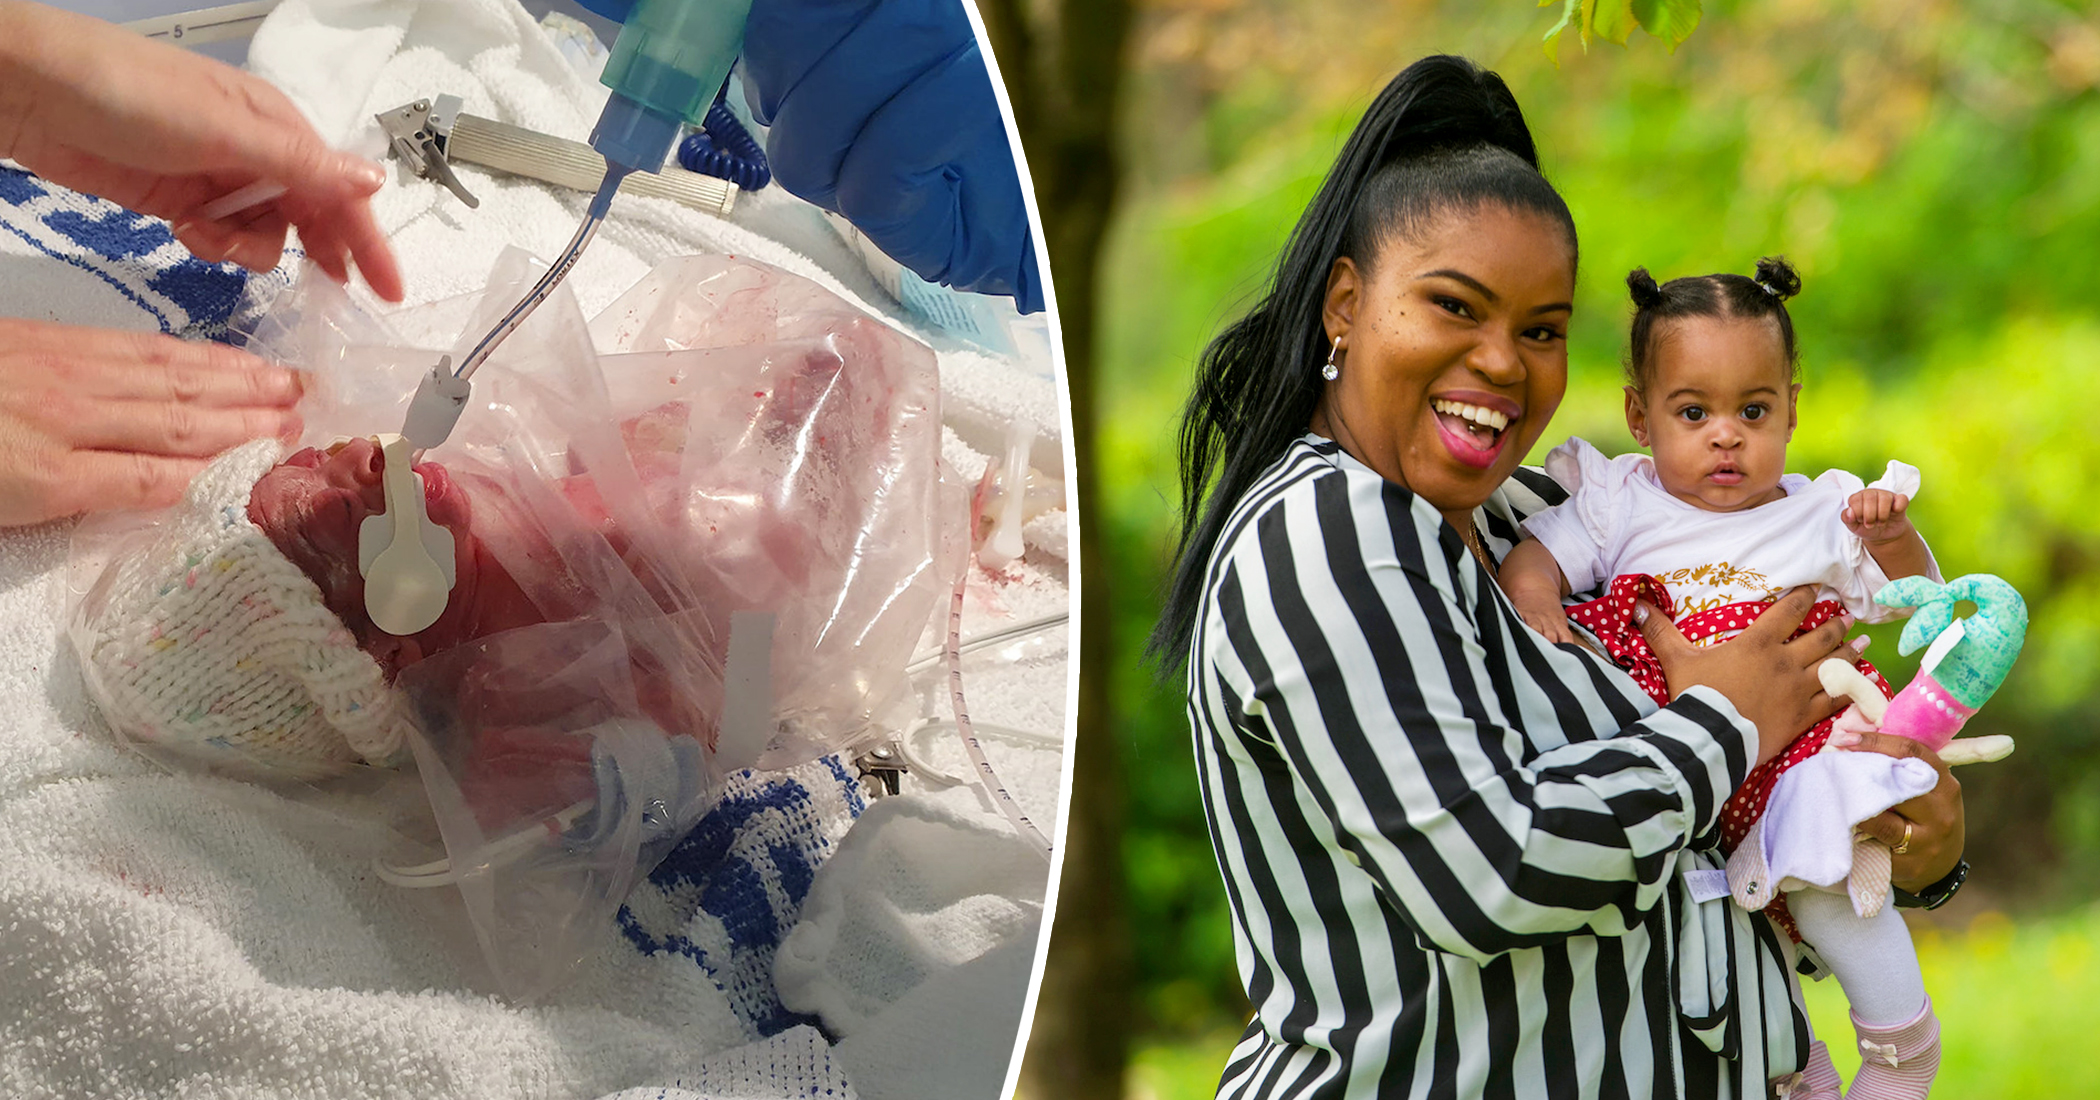 Preemie Born At Weeks Was Put Into A Sandwich Bag Defies Odds And Is Now Thriving